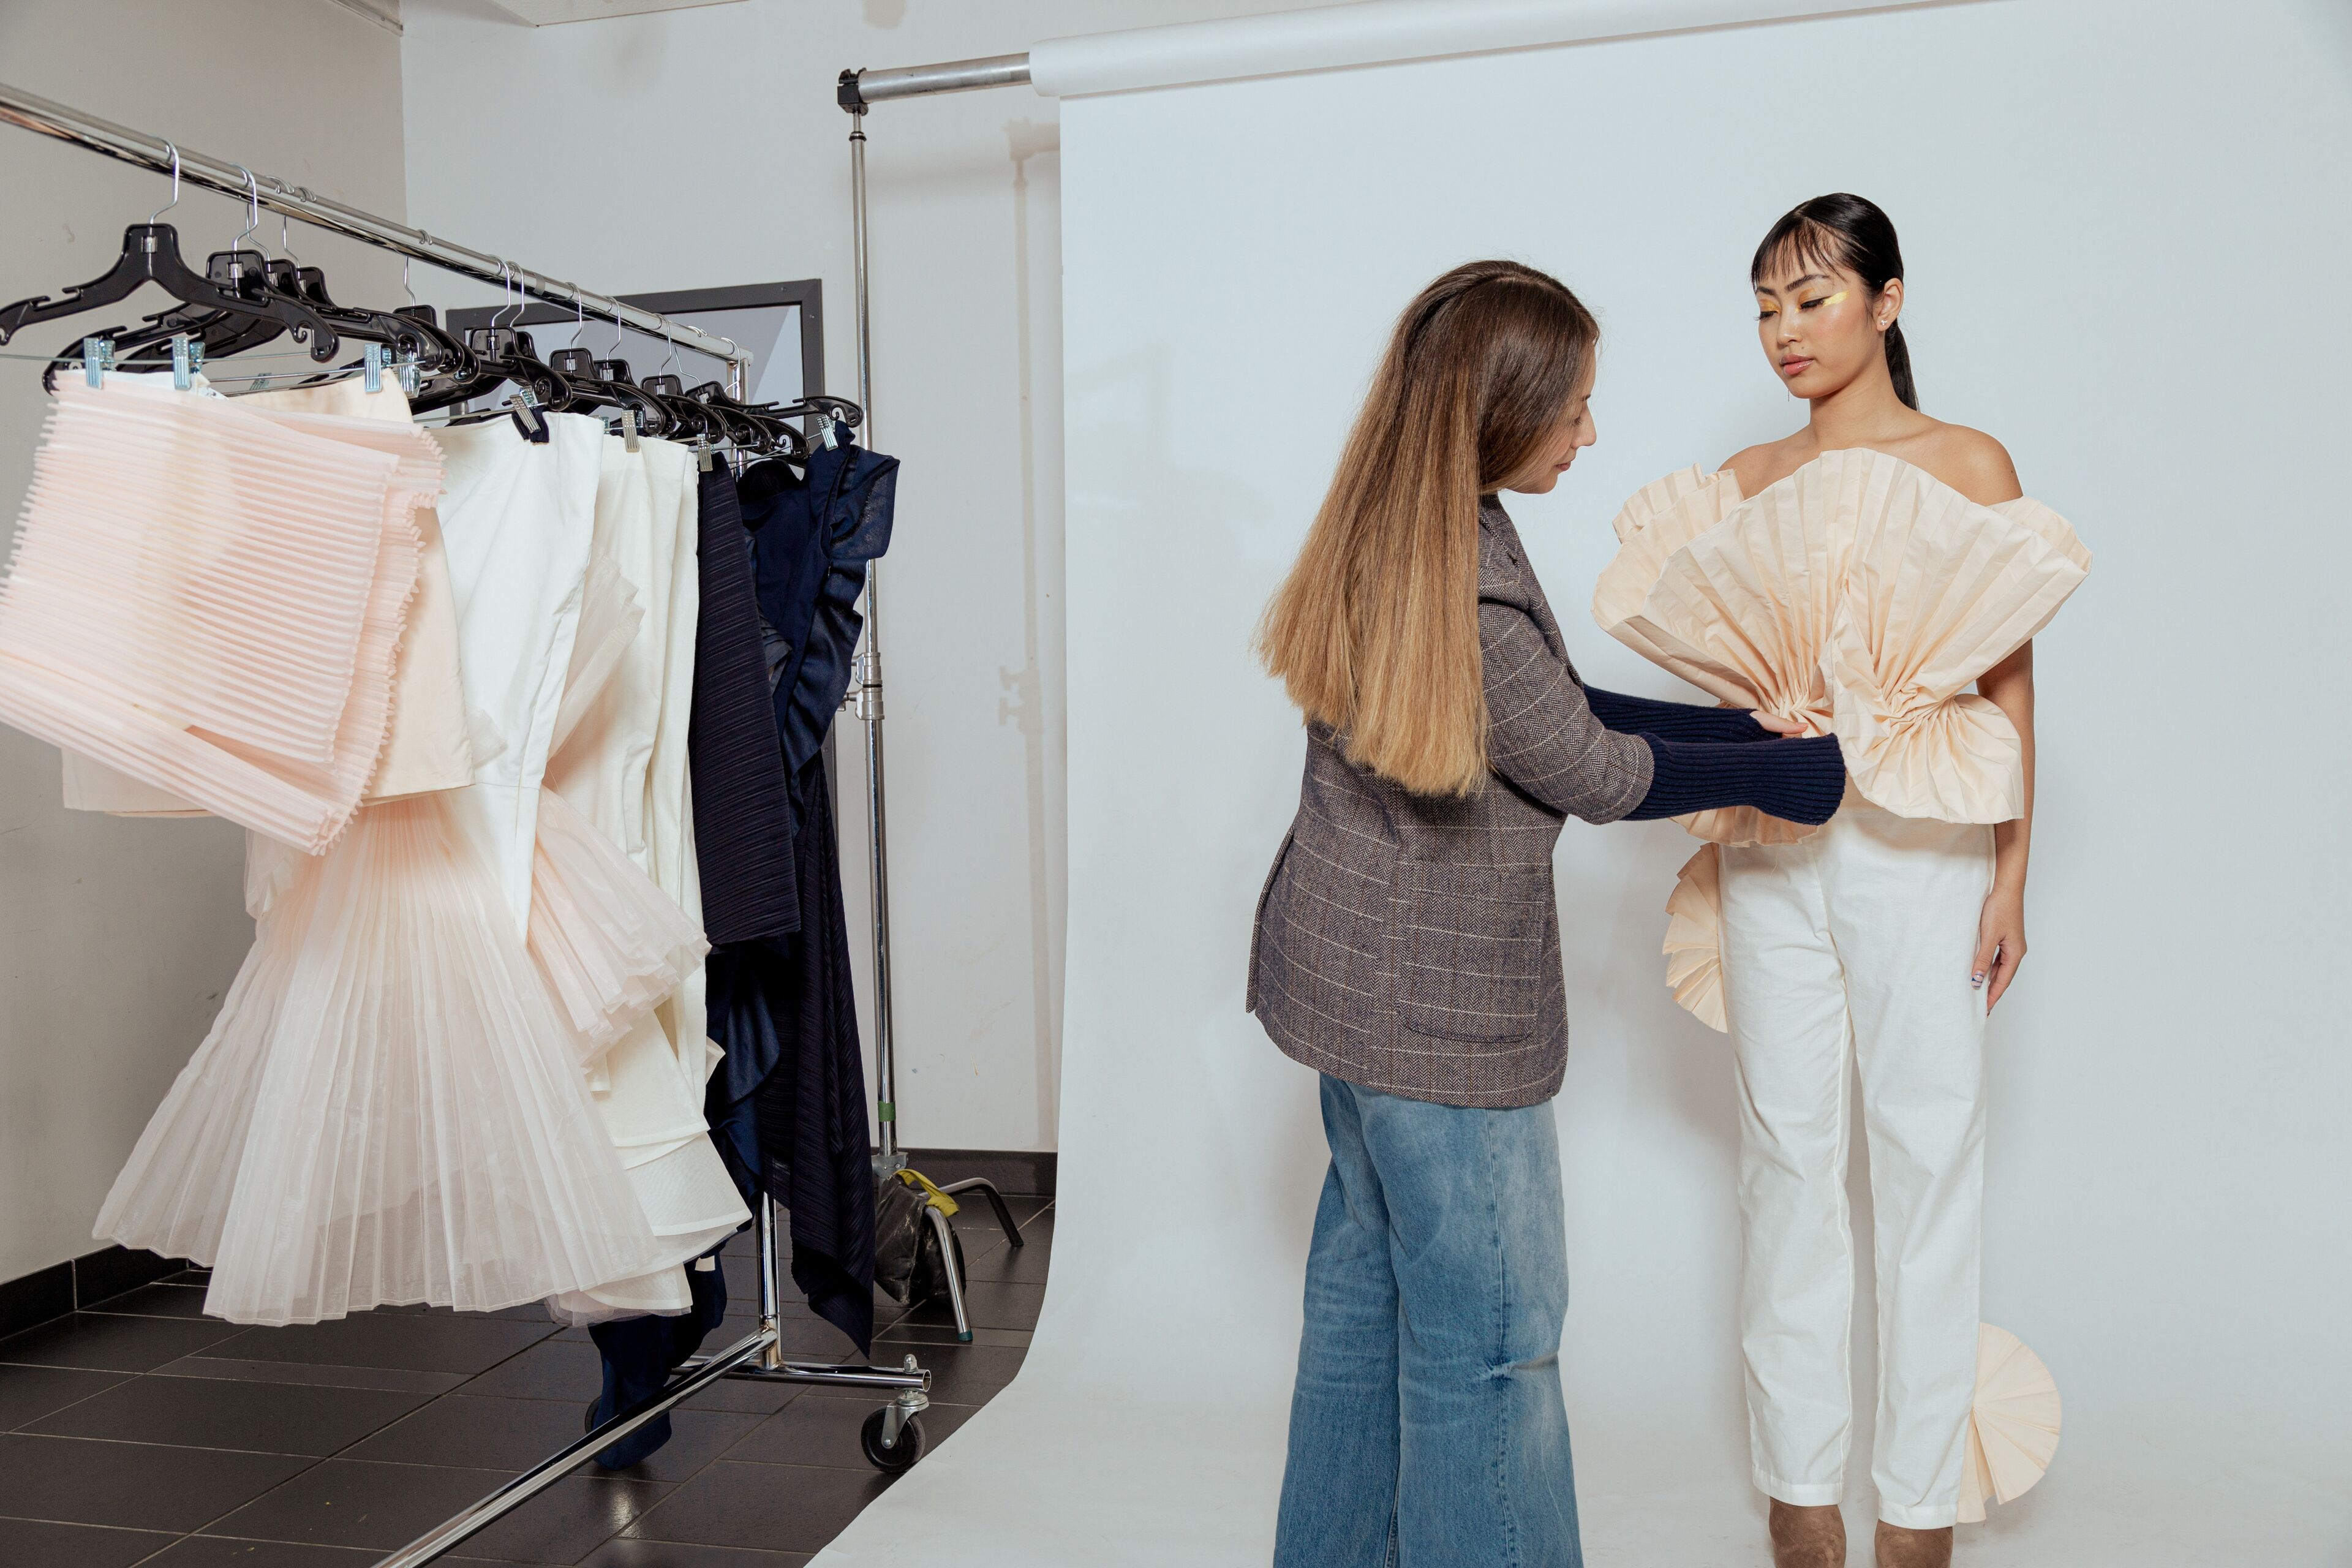 A designer adjusts a unique ruffled garment on a model in a fashion studio, with a rack of clothes in the background.